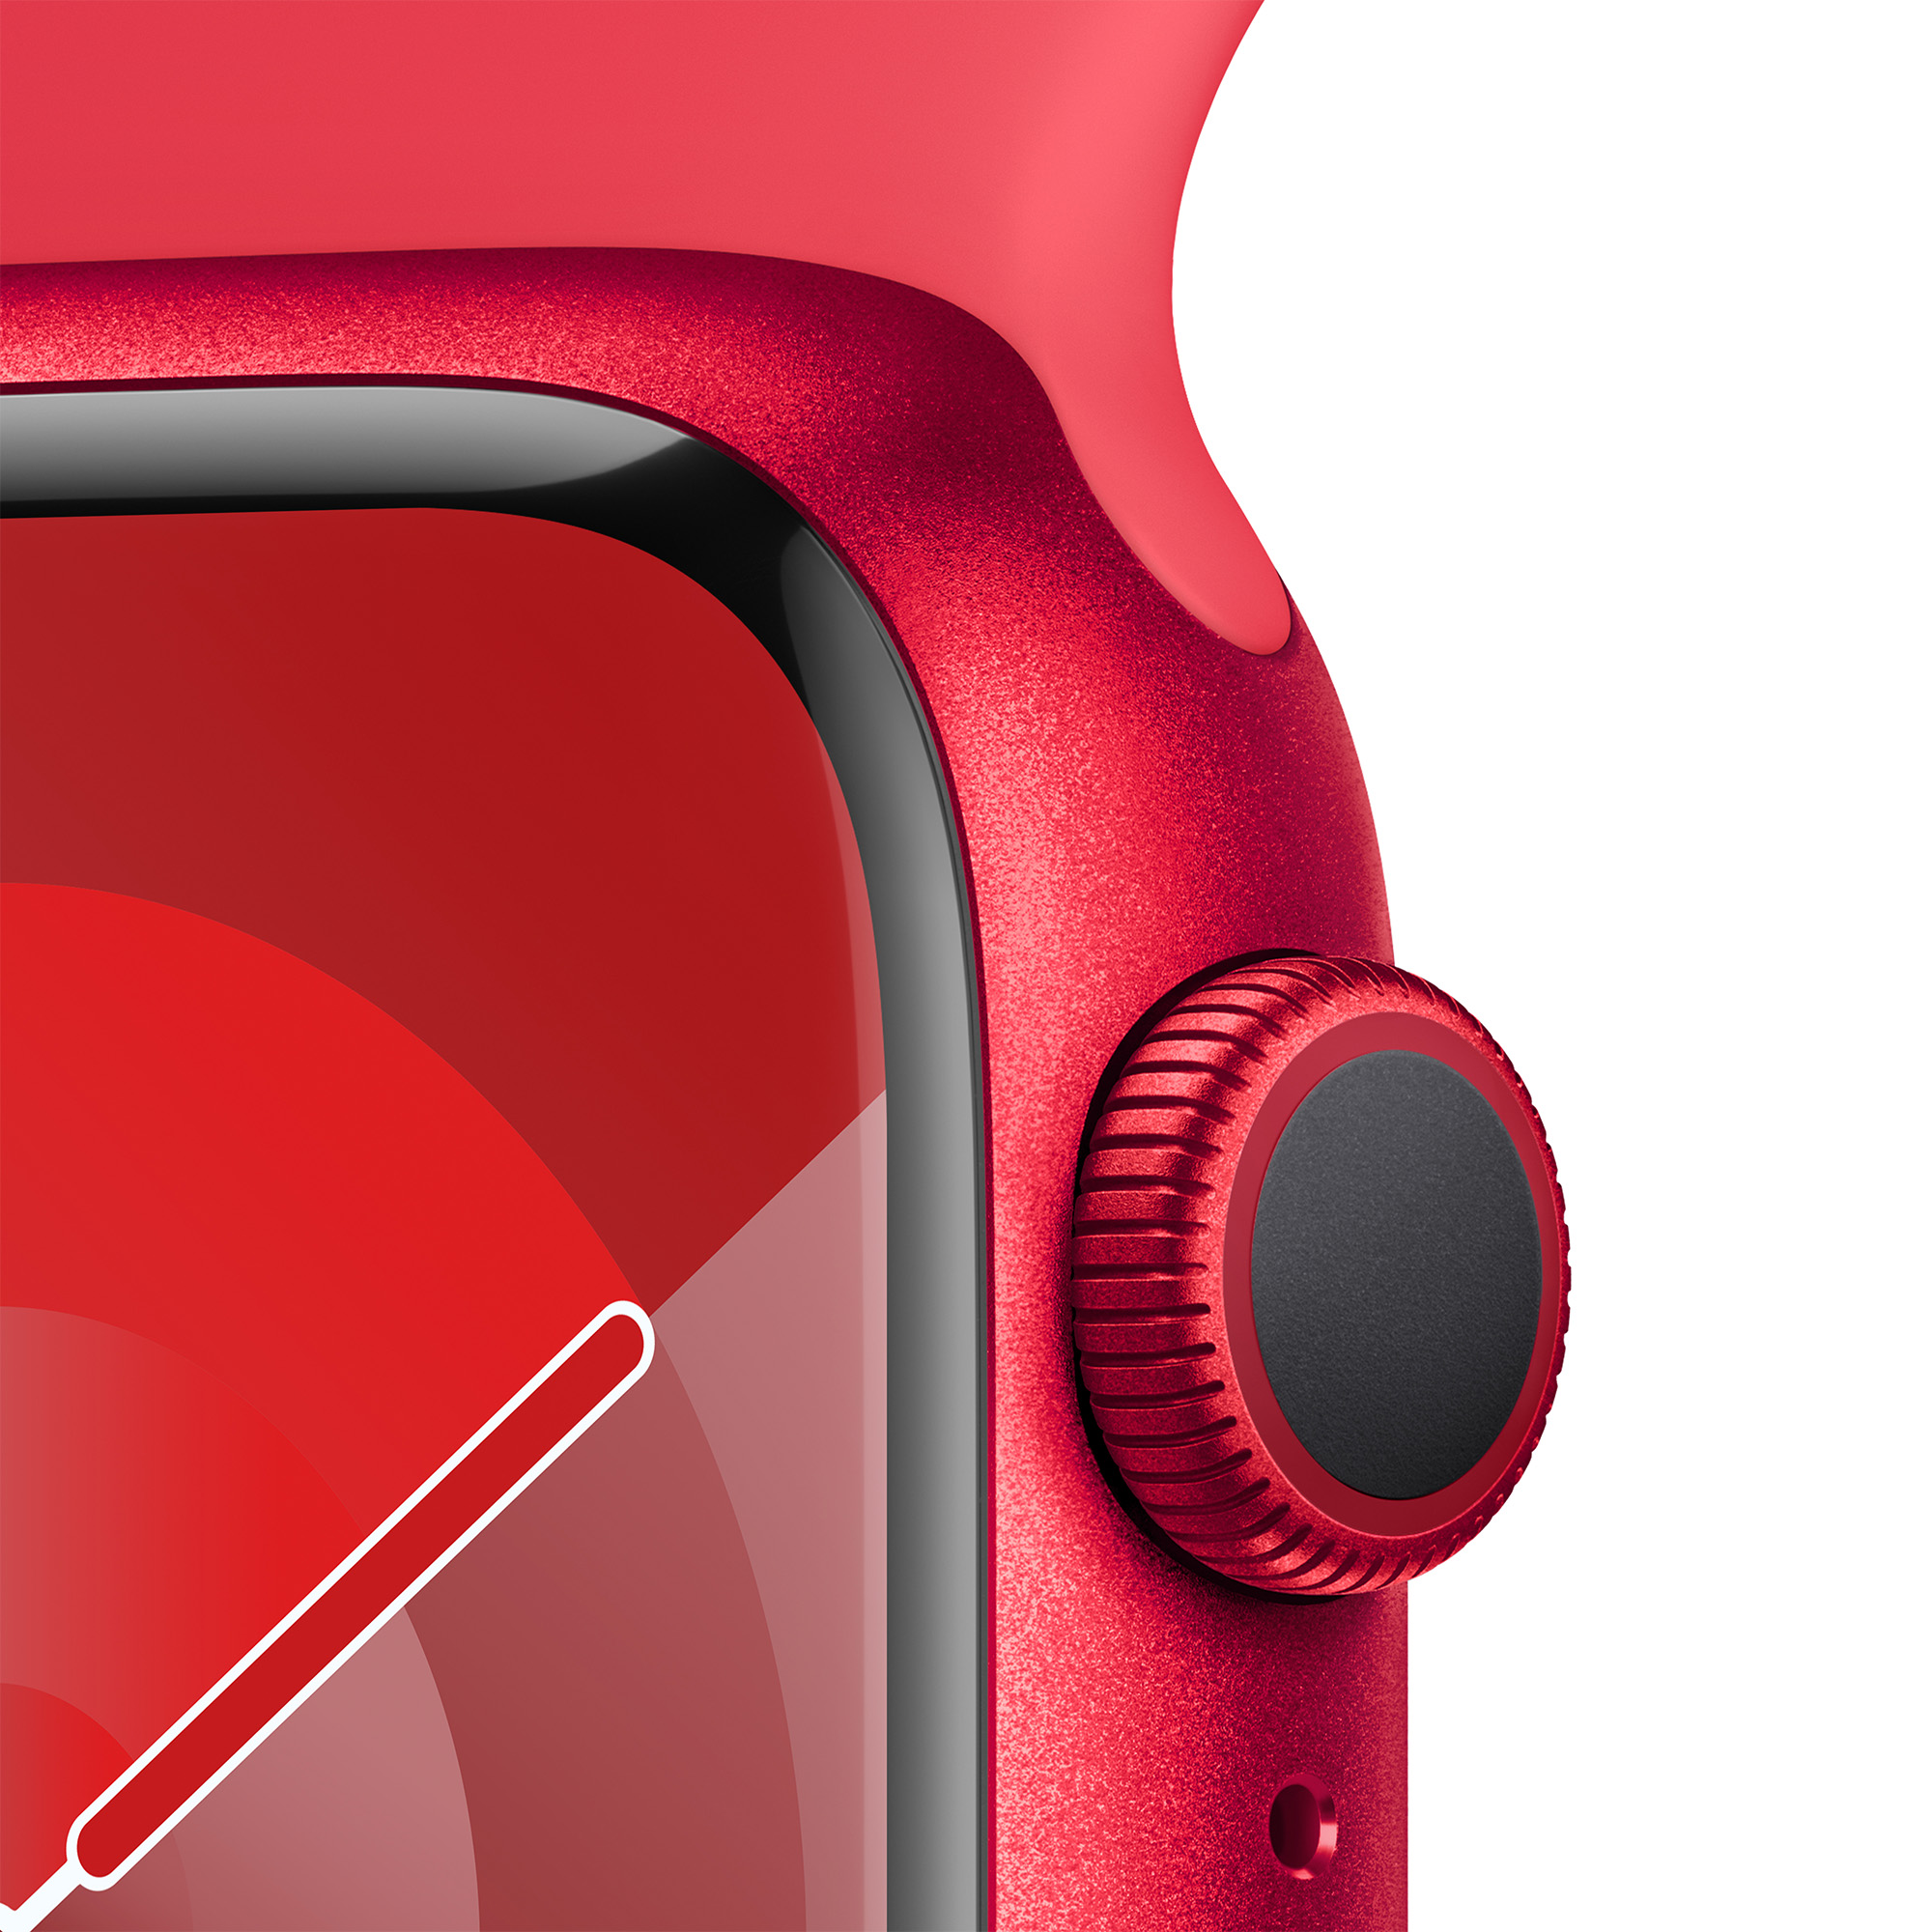 Apple Watch Series 9 GPS 41mm PRODUCT RED Aluminium Case with RED Sport Band - S/M